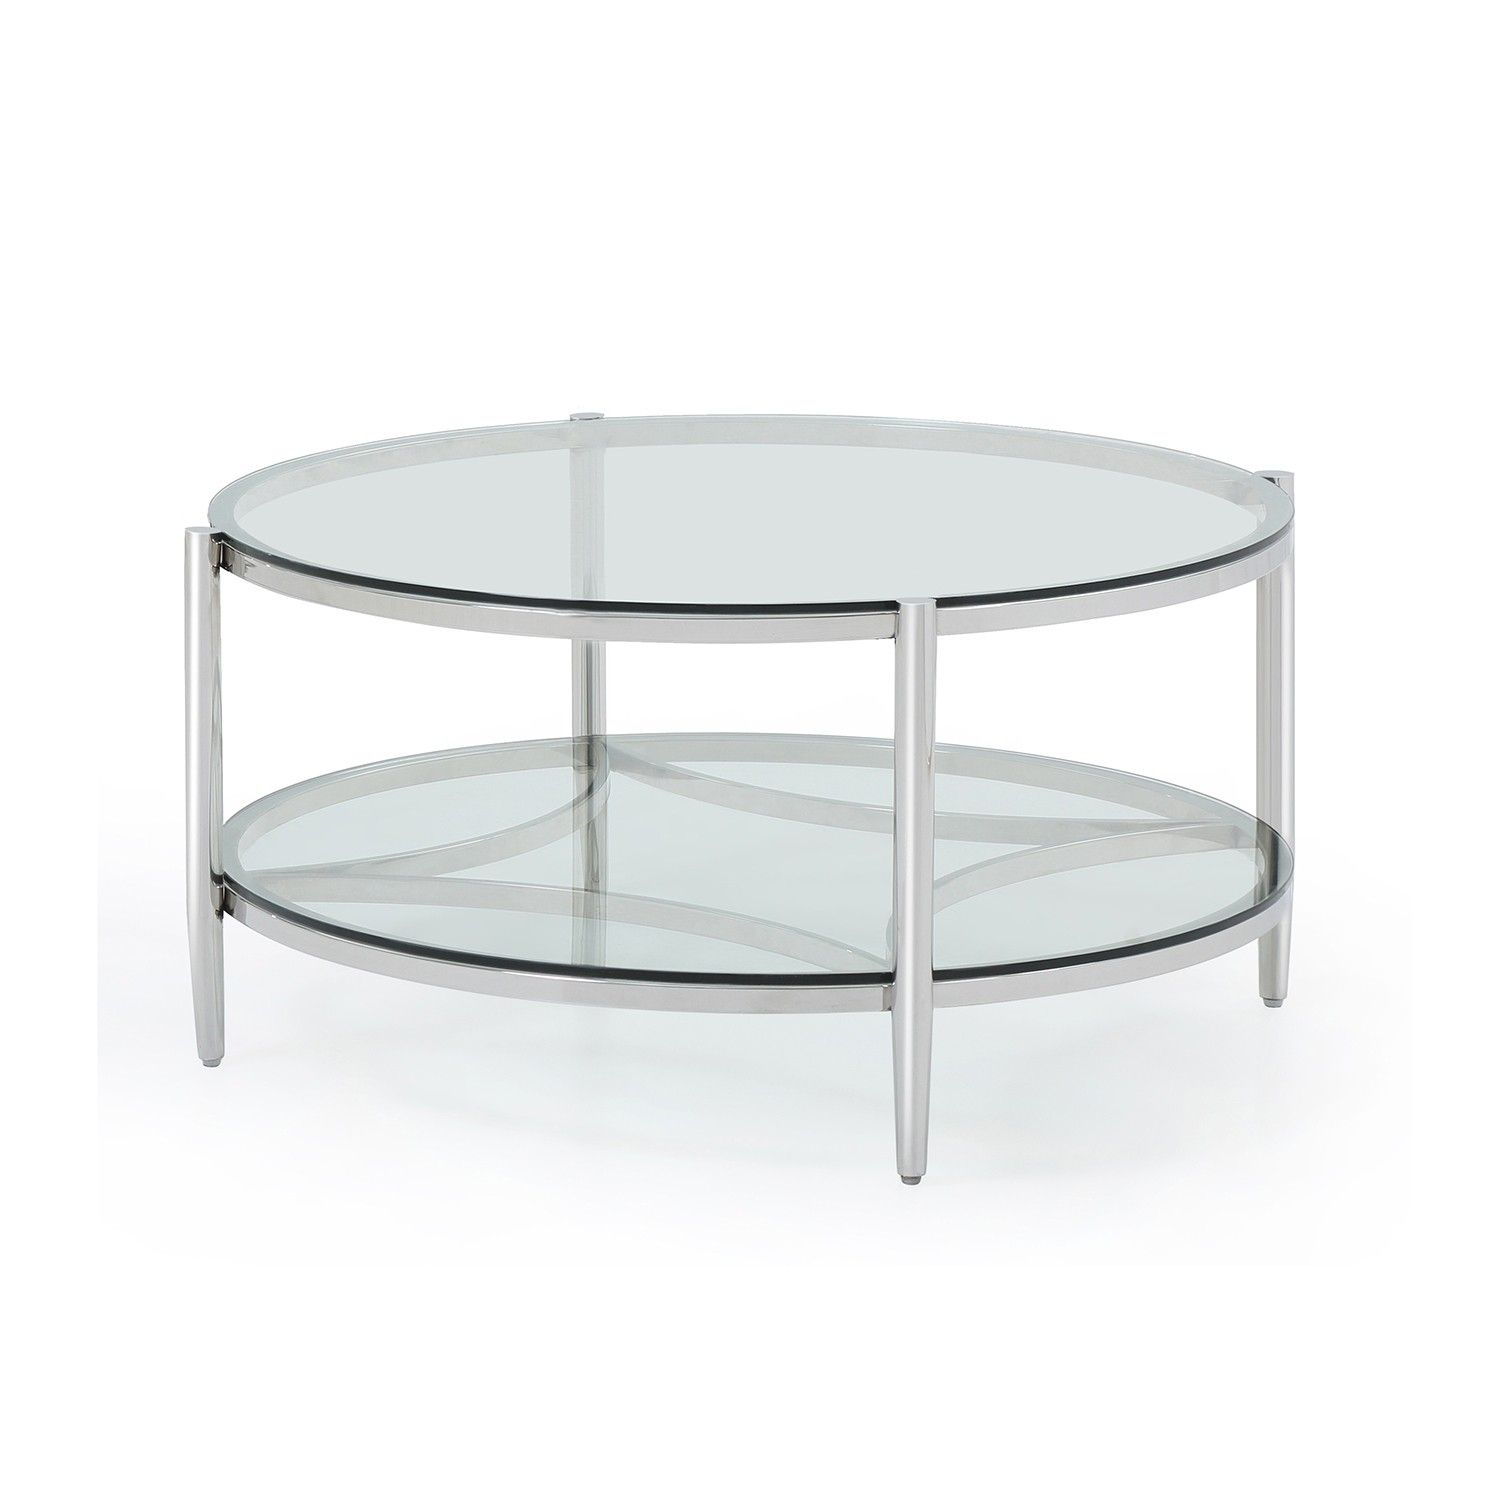 Casa Stanmore Circular Coffee Table | Leekes Inside Brushed Stainless Steel Coffee Tables (View 13 of 15)